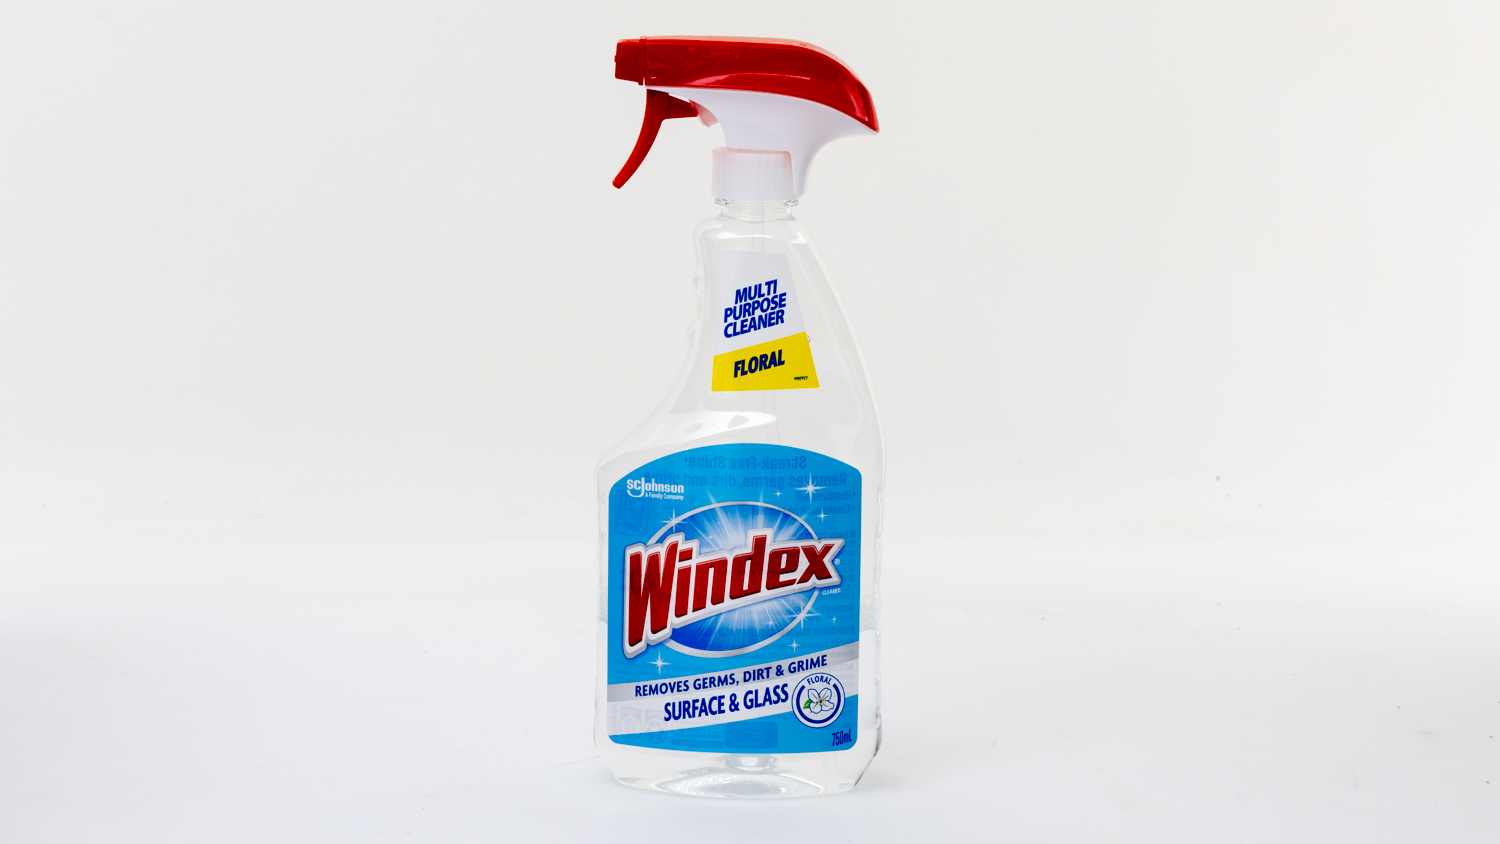 Windex Surface & Glass Multi Purpose Cleaner Floral carousel image